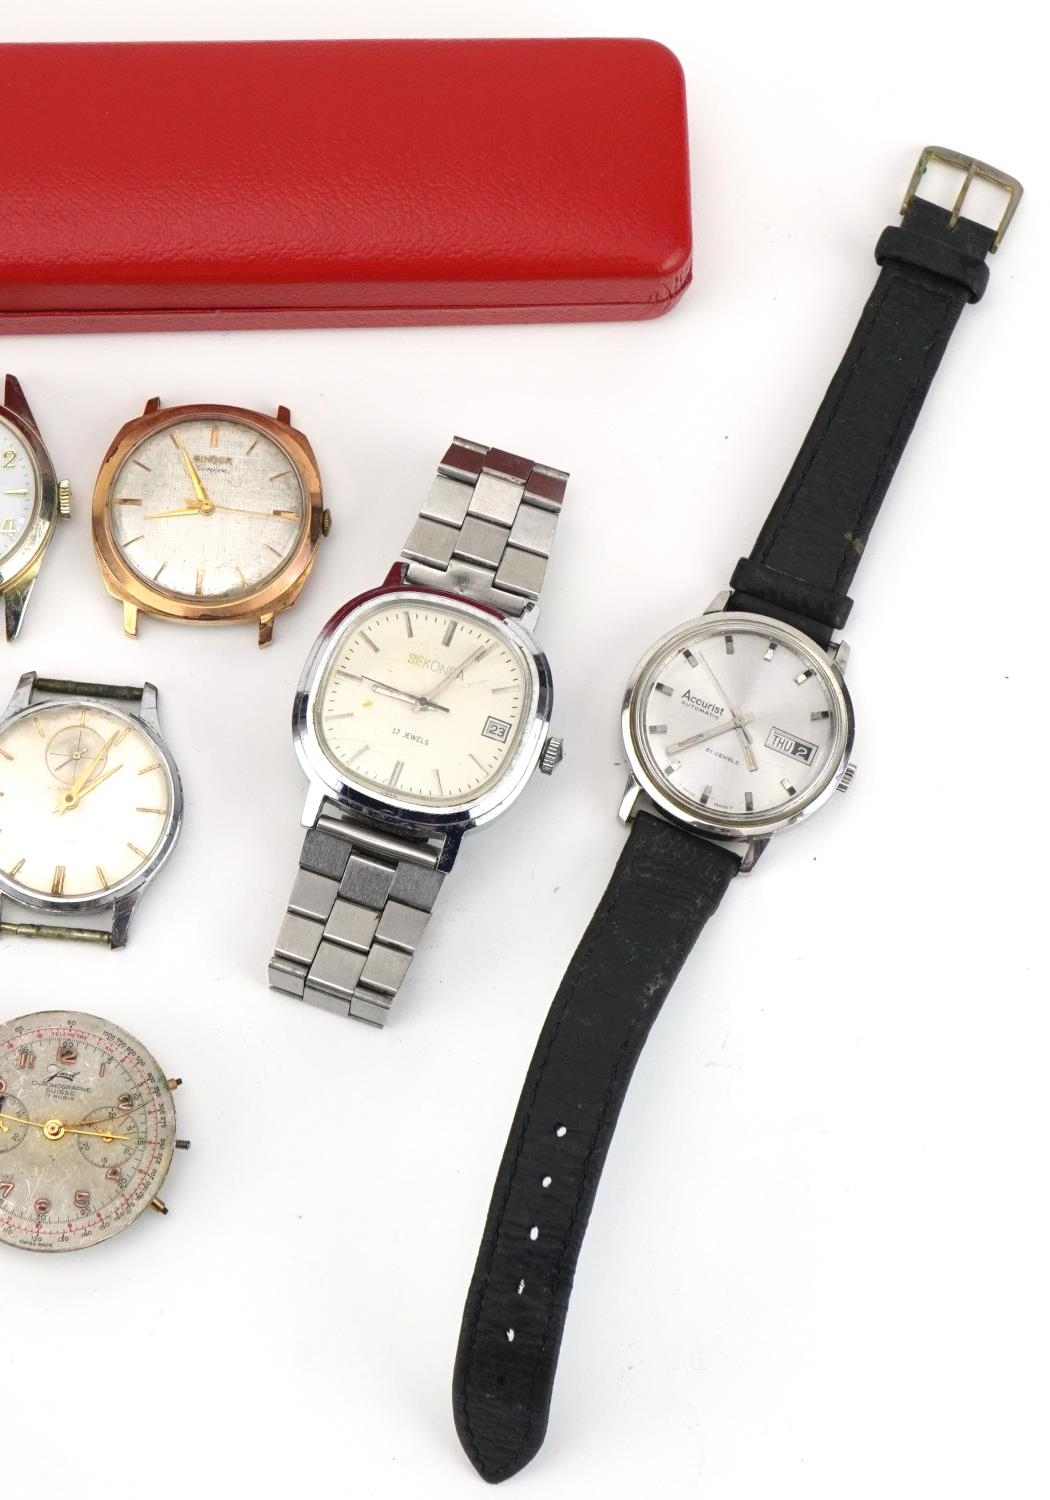 Eleven vintage gentlemen's wristwatches including Waltham, Singer, Avia, Accurist and Saga Electric, - Image 3 of 3